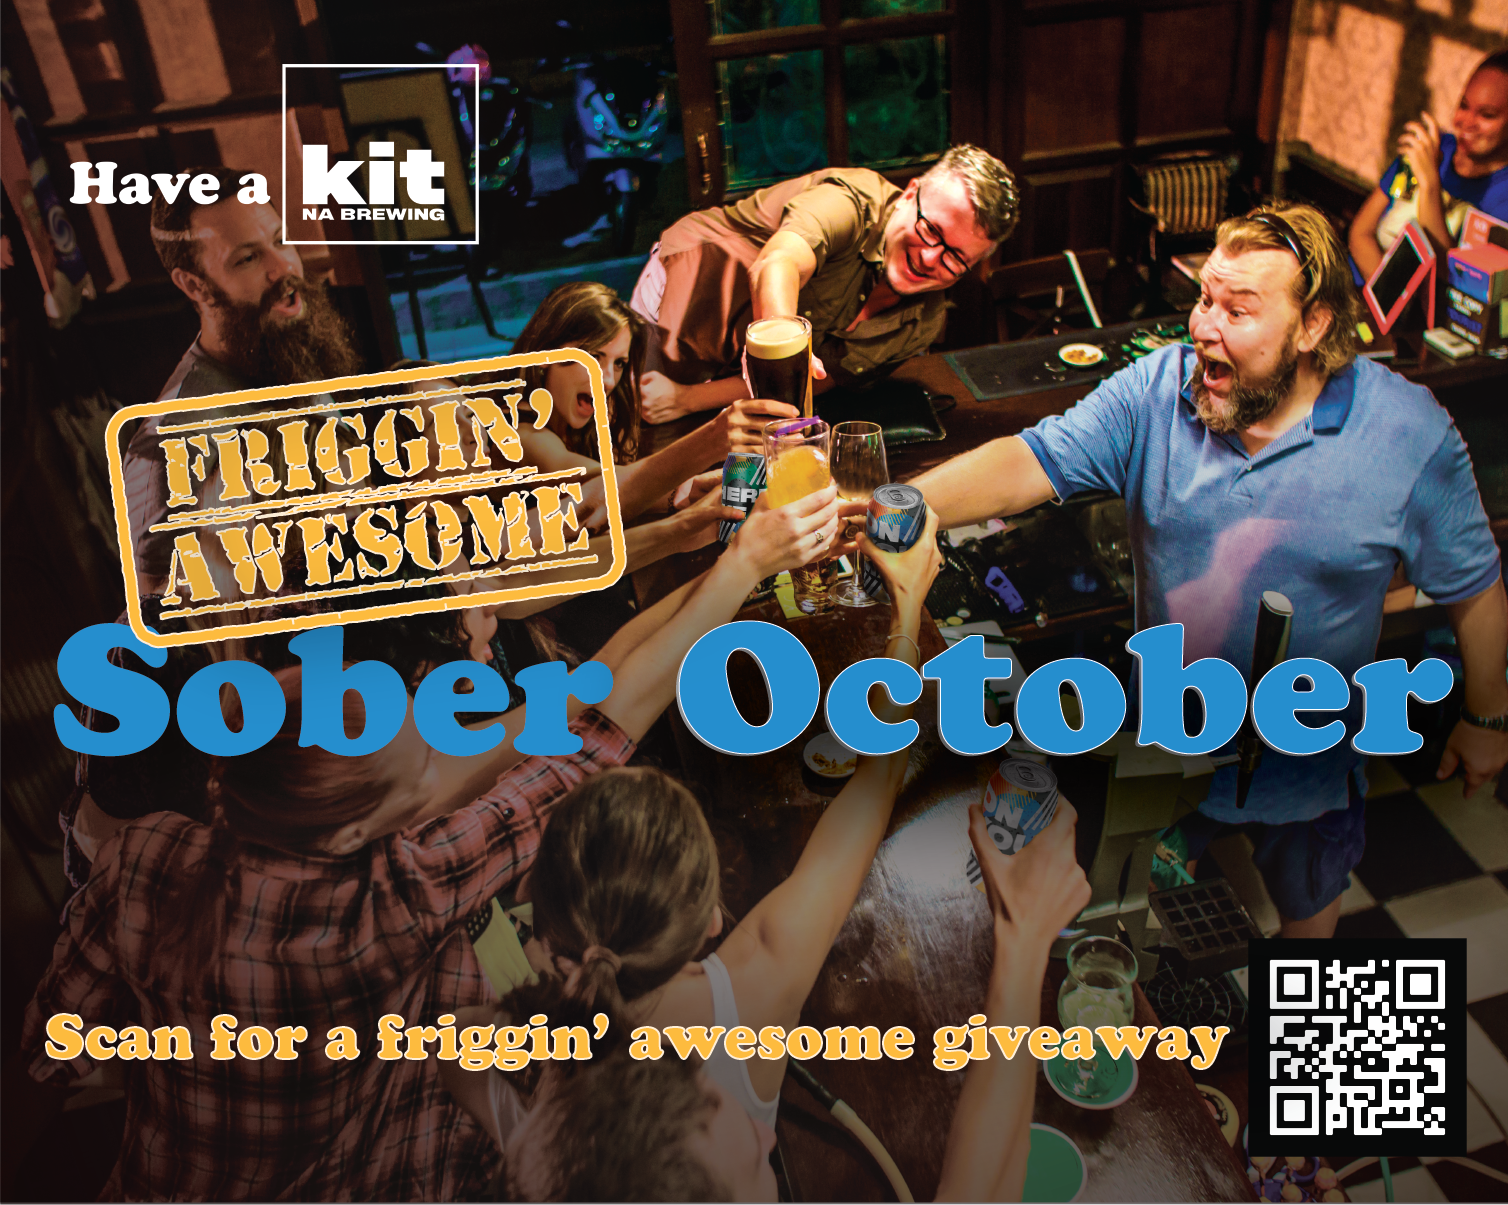 Kit NA Brewing Launches Friggin' Awesome Sober October - A Month-Long Celebration of Living Life to the Fullest